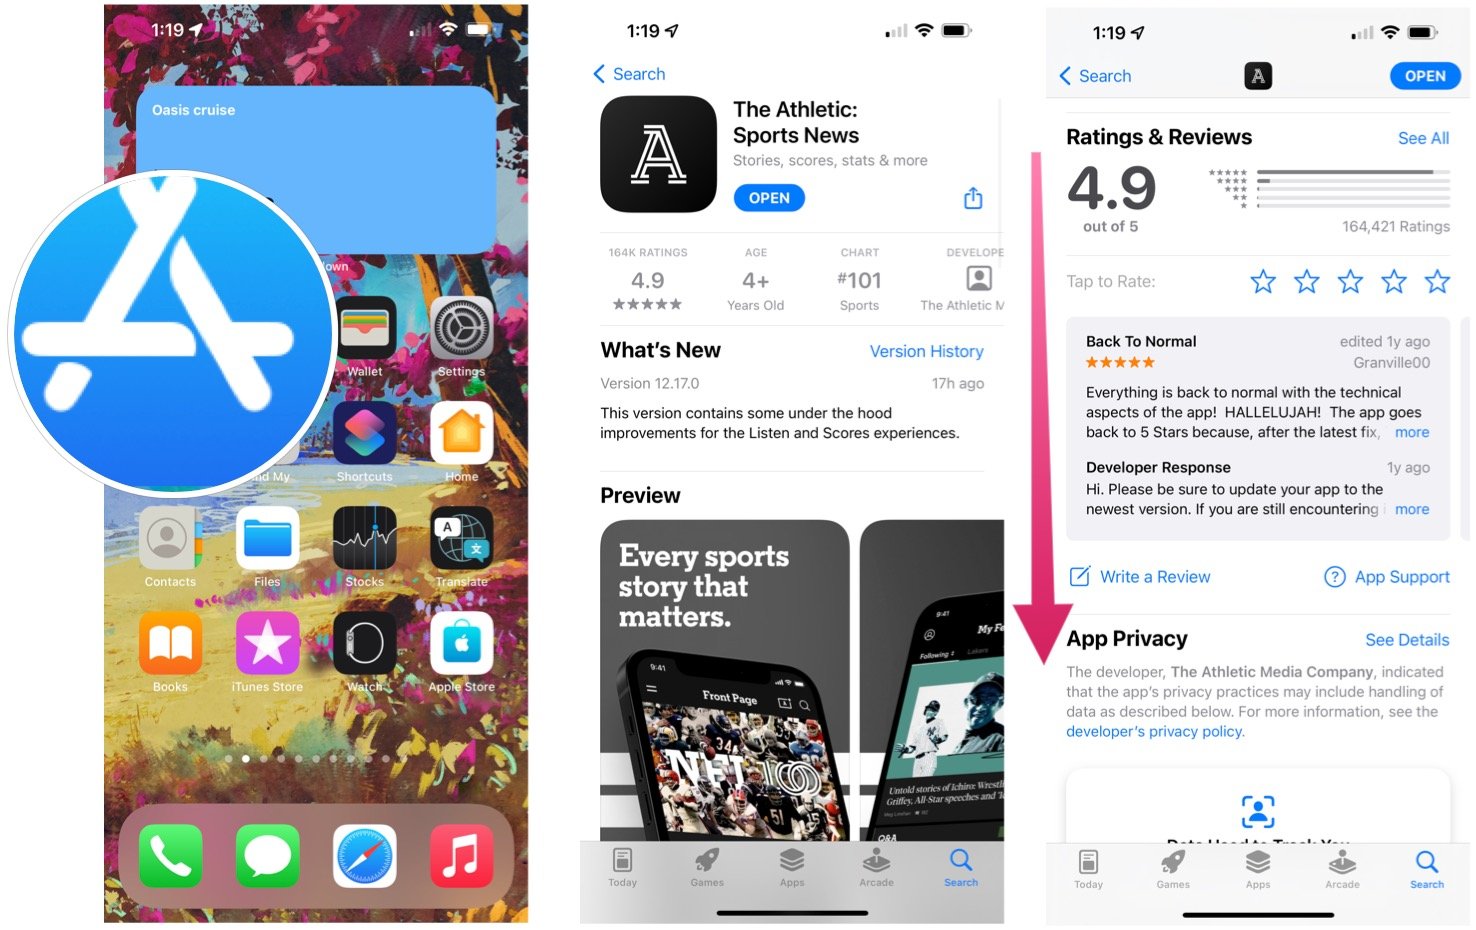 To find reviews in the App Store, launch the App Store app, then app on an app that you wish to see reviews. Swipe up or down and tap See All next to Ratings & Reviews.